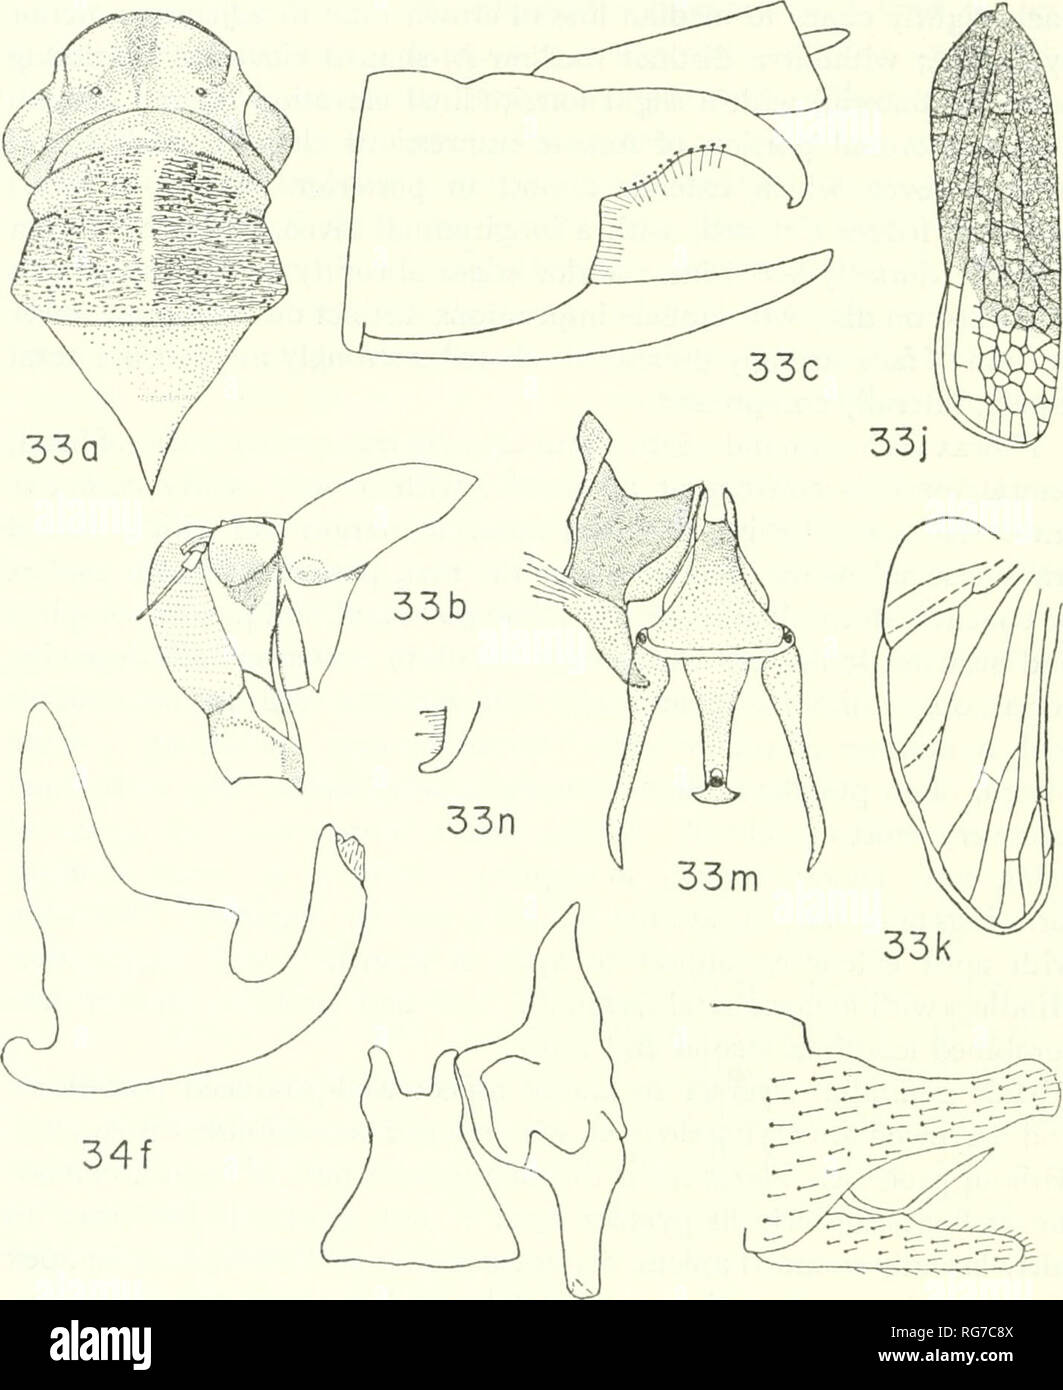 . Bulletin - United States National Museum. Science. 48 U.S. NATIONAL MUSEUM BULLETIN 2G1. 34e 34c Figures 33, 34.—33, Homoscarta irregularis (Signorct): j, forewing; k, hindwing; m, one style, connective, aedeagus, and paraphyses, dorsal view; n, apex of style, lateral view. 34, H. superciliaris (Jacobi), specimen from Cuzco, Peru; process shown in c is a paraphysis. in a position from which several other conditions found in the sub- family could have been derived. The males are larger than the females. Species of Homoscarta are known from Ecuador, Peru, Bolivia, and Brazil. The species are v Stock Photo